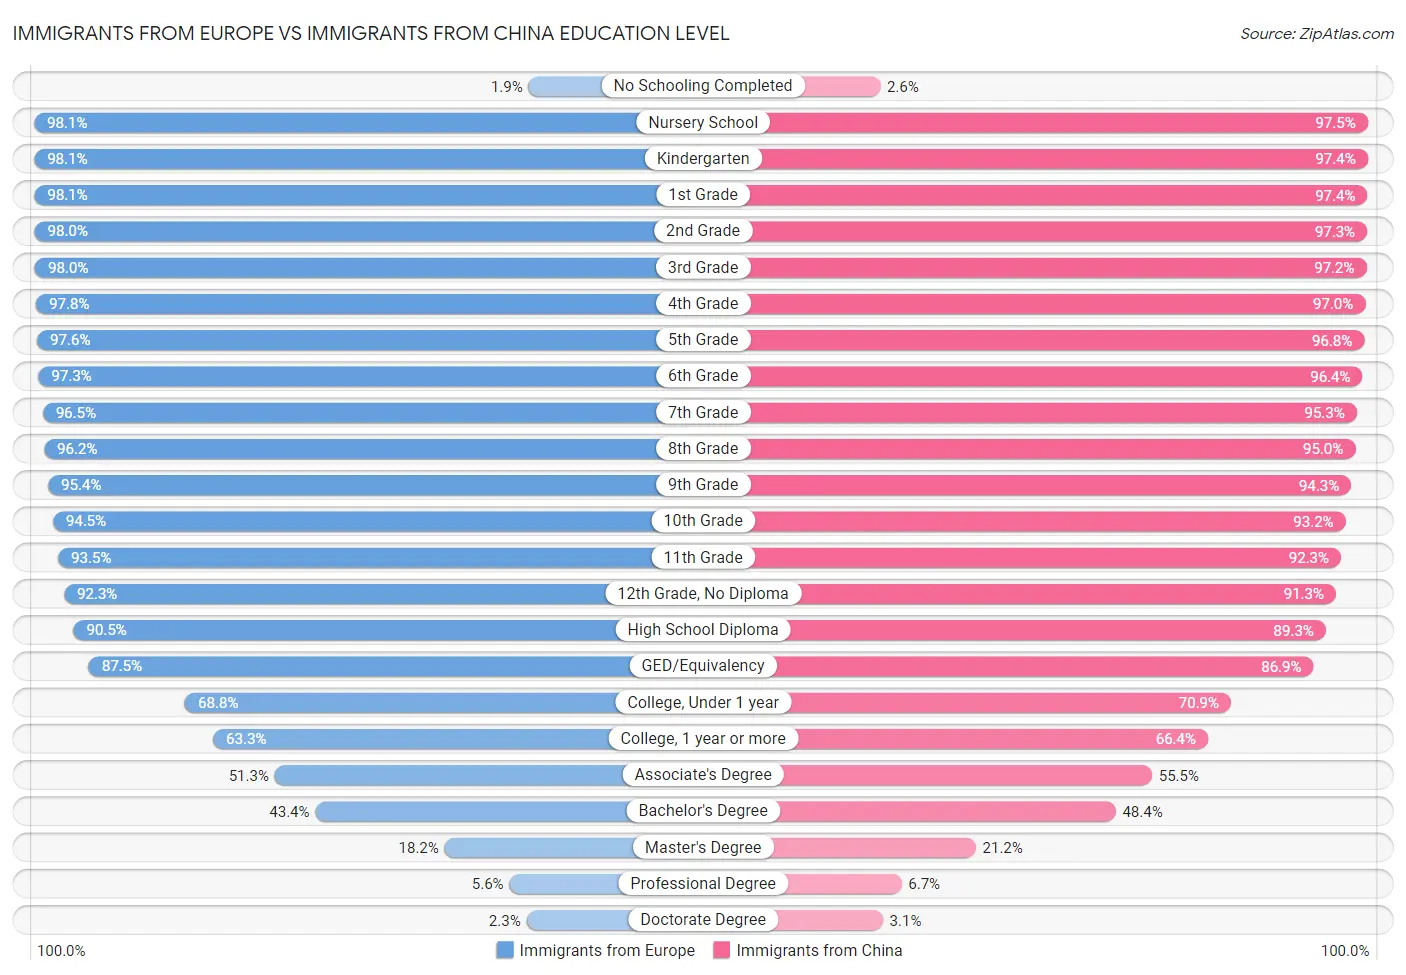 Immigrants from Europe vs Immigrants from China Education Level